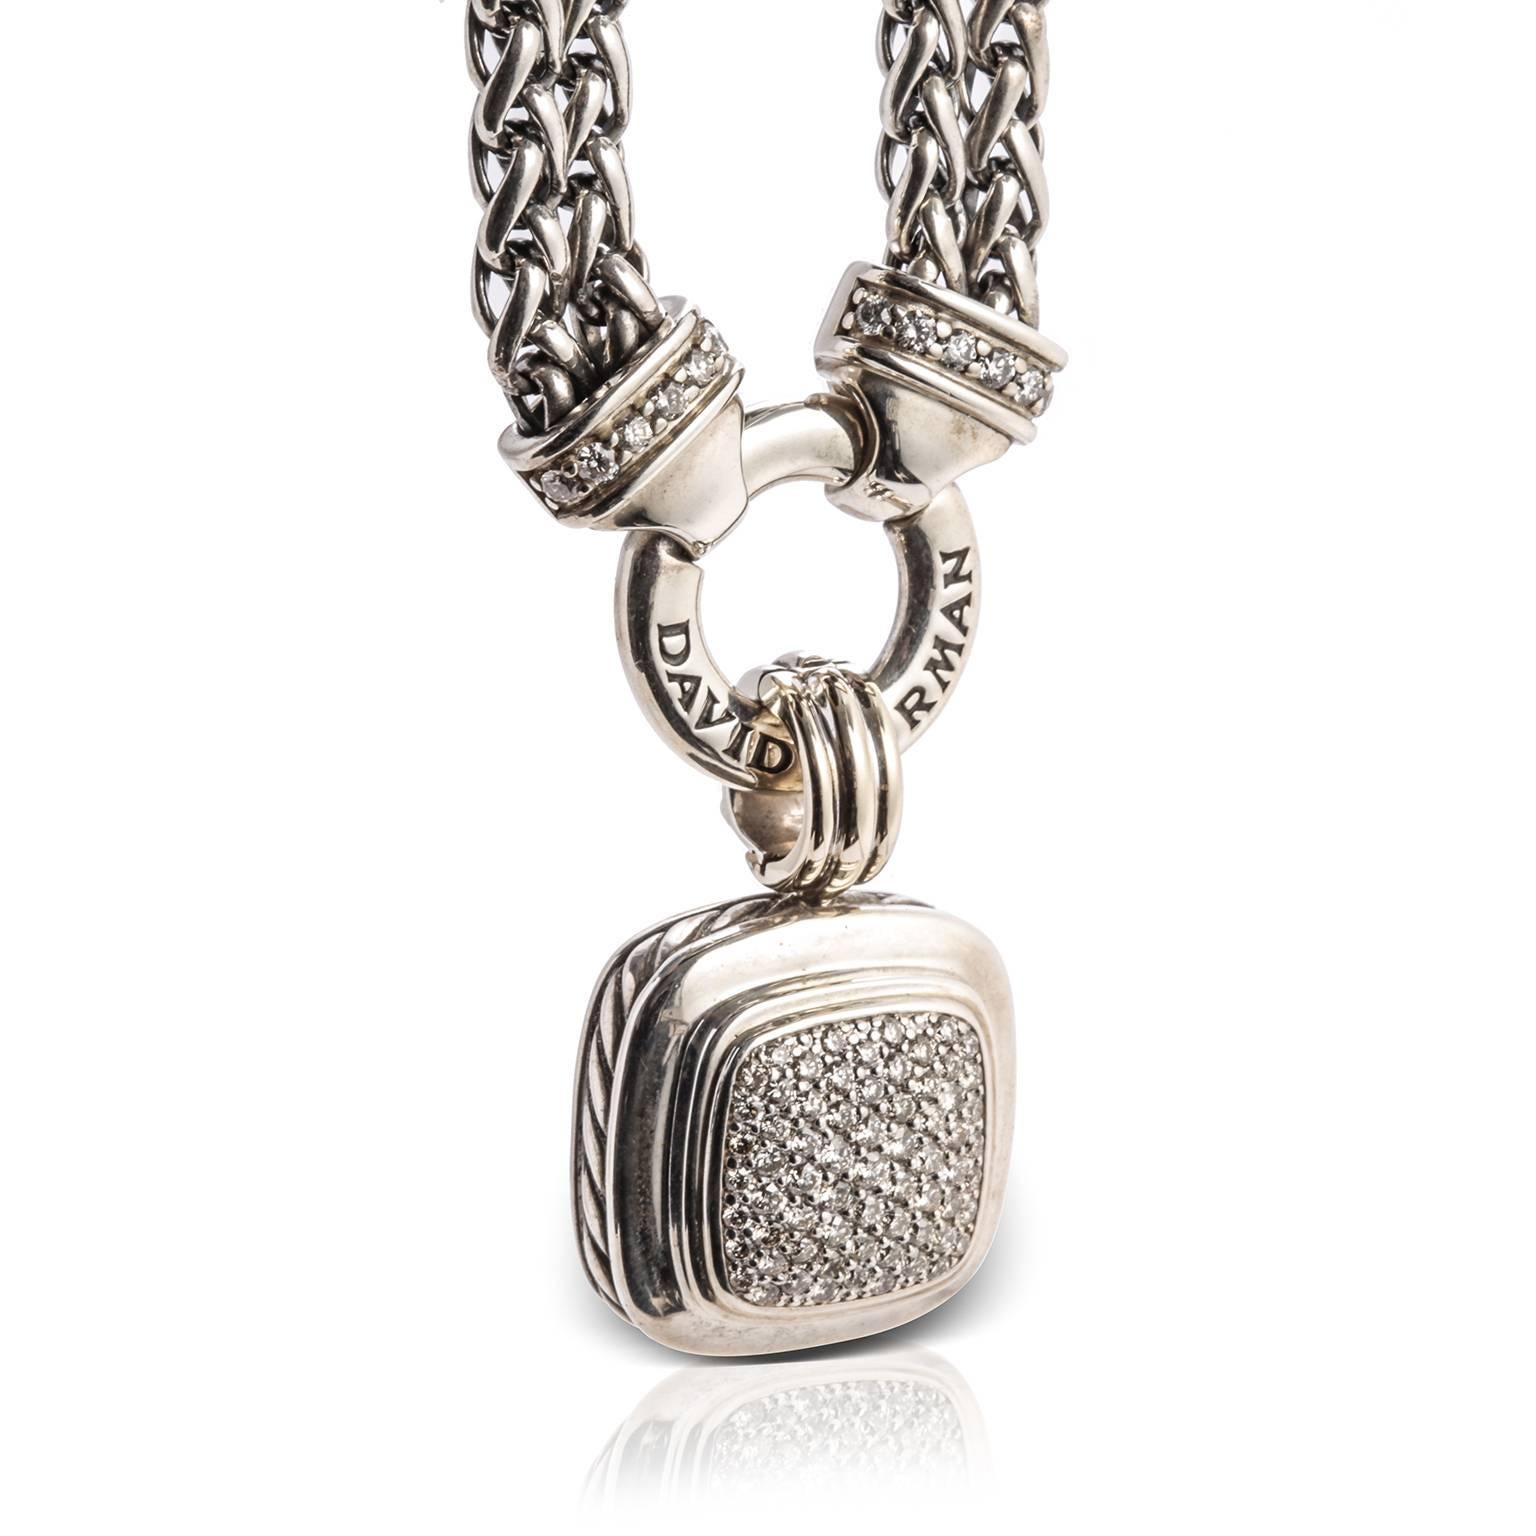 Previously loved, sterling silver David Yurman Albion pendant necklace featuring 1.00 carat of diamond pave bezel set at center. 18 karat white gold accents with 0.22 carat of diamond pave set, cable texture, hinged round bail, double strand wheat